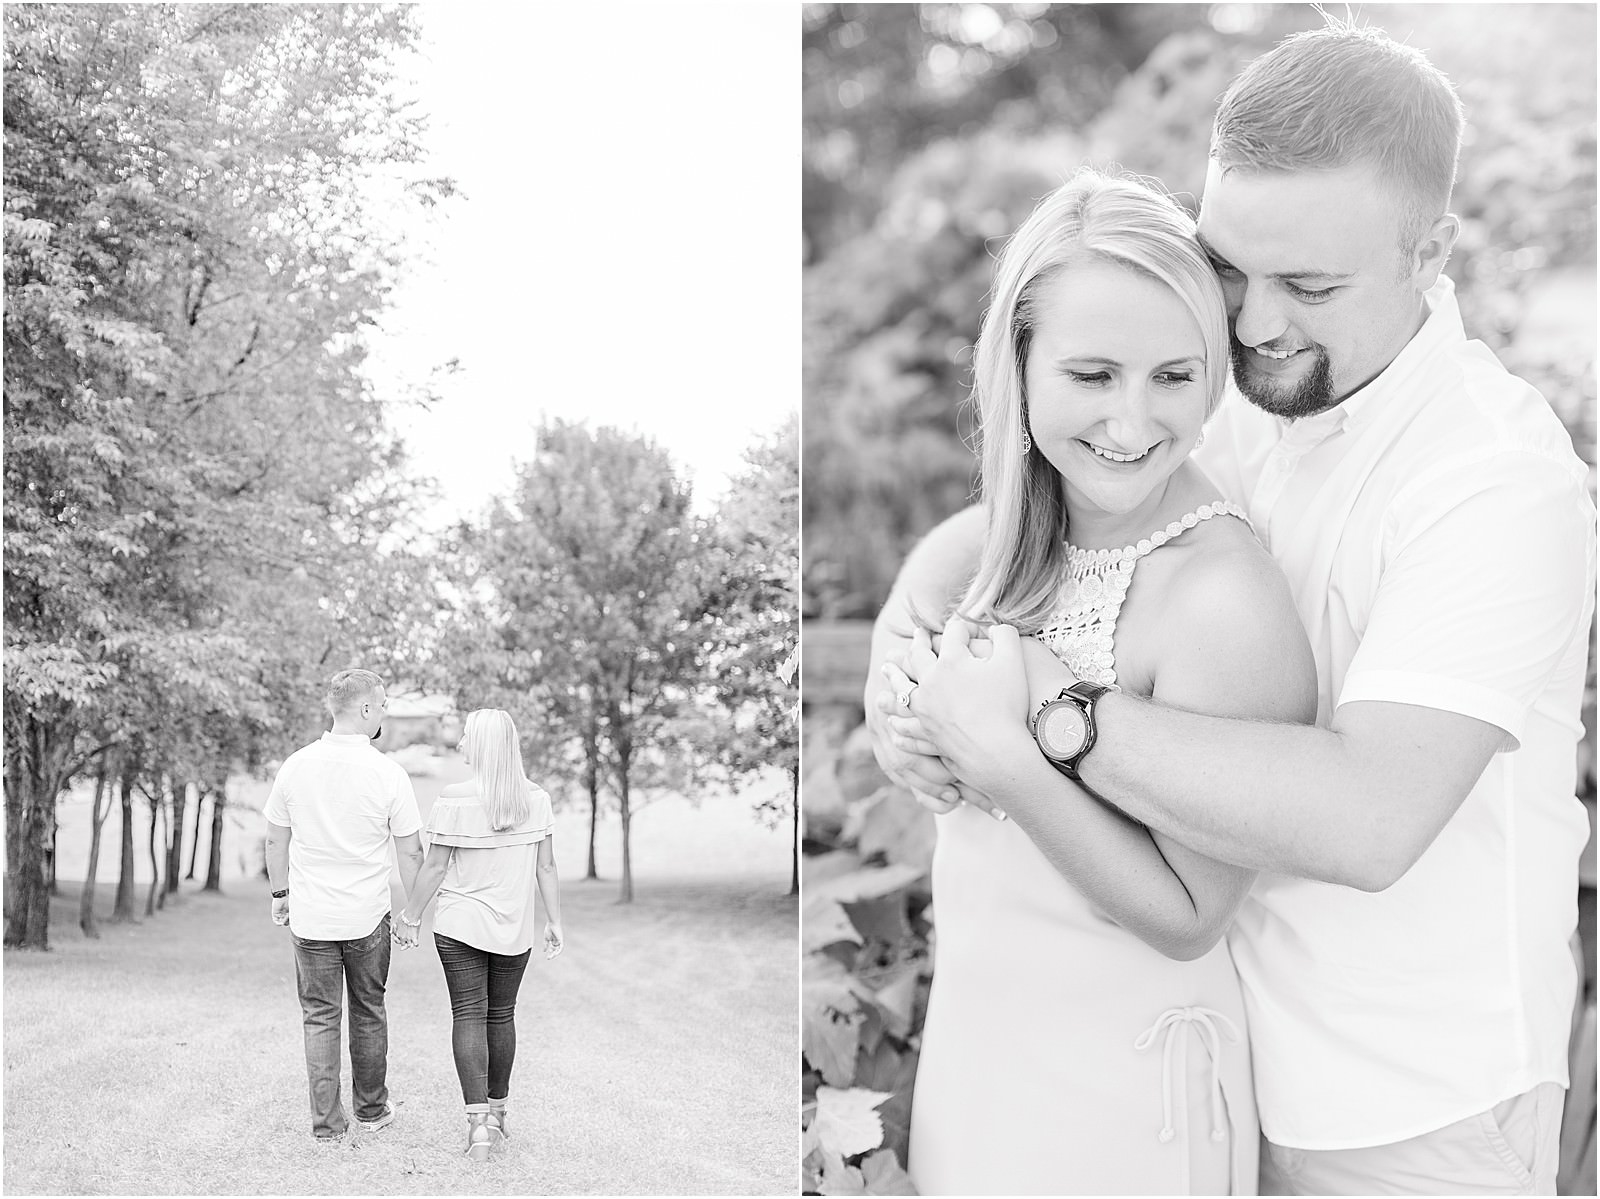 Lauren and Bryce | The Corner House B&ed and Breakfast Engagement Session | Bret and Brandie Photography 007.jpg